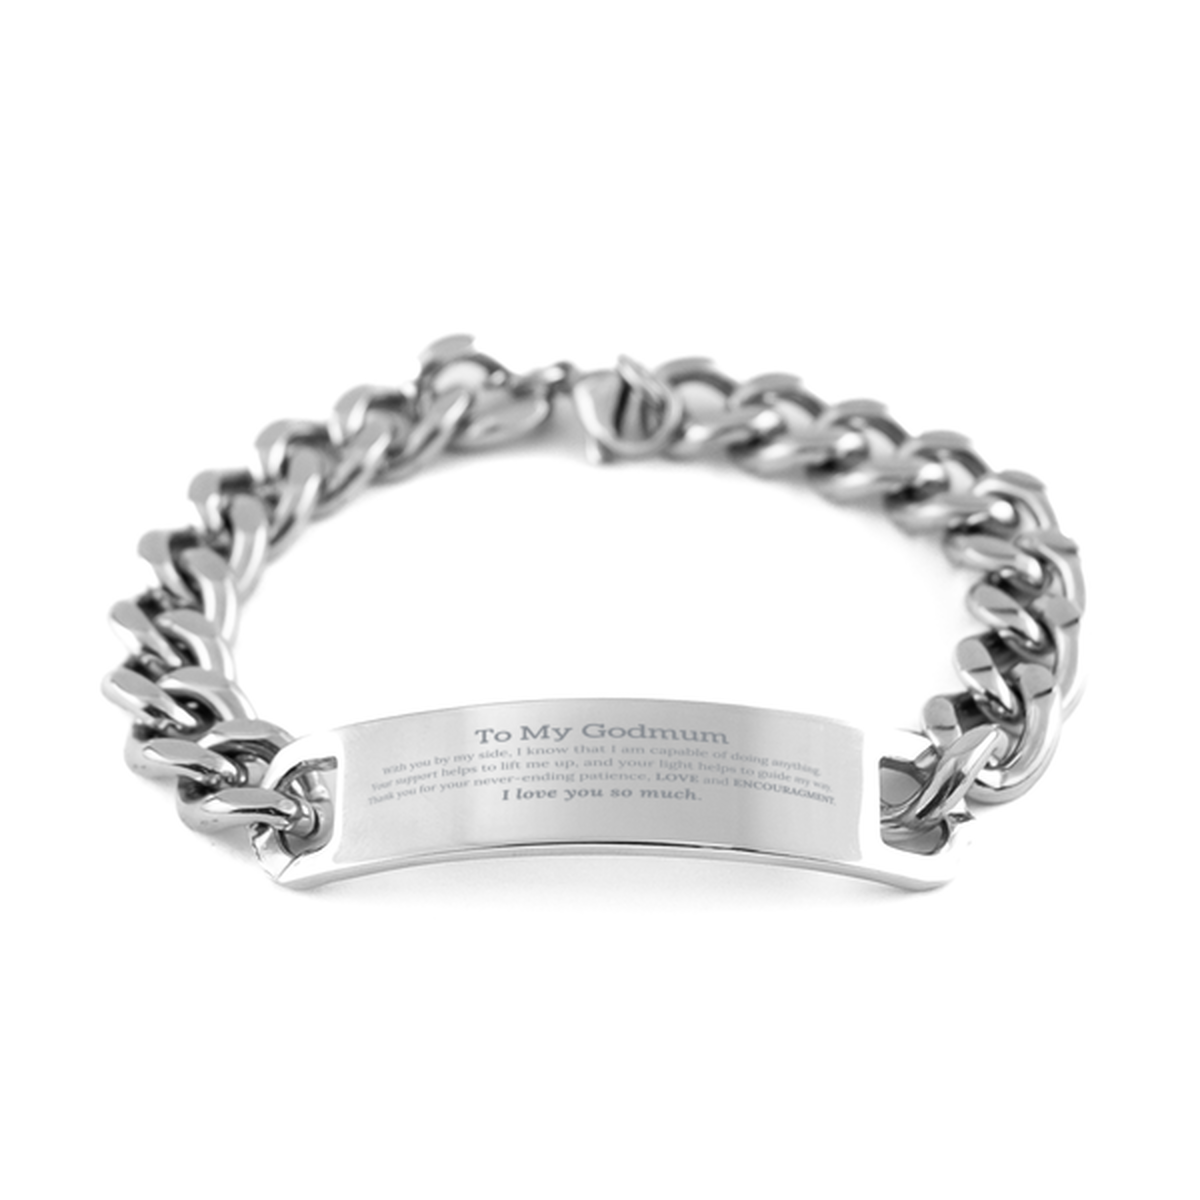 Appreciation Godmum Cuban Chain Stainless Steel Bracelet Gifts, To My Godmum Birthday Christmas Wedding Keepsake Gifts for Godmum With you by my side, I know that I am capable of doing anything. I love you so much